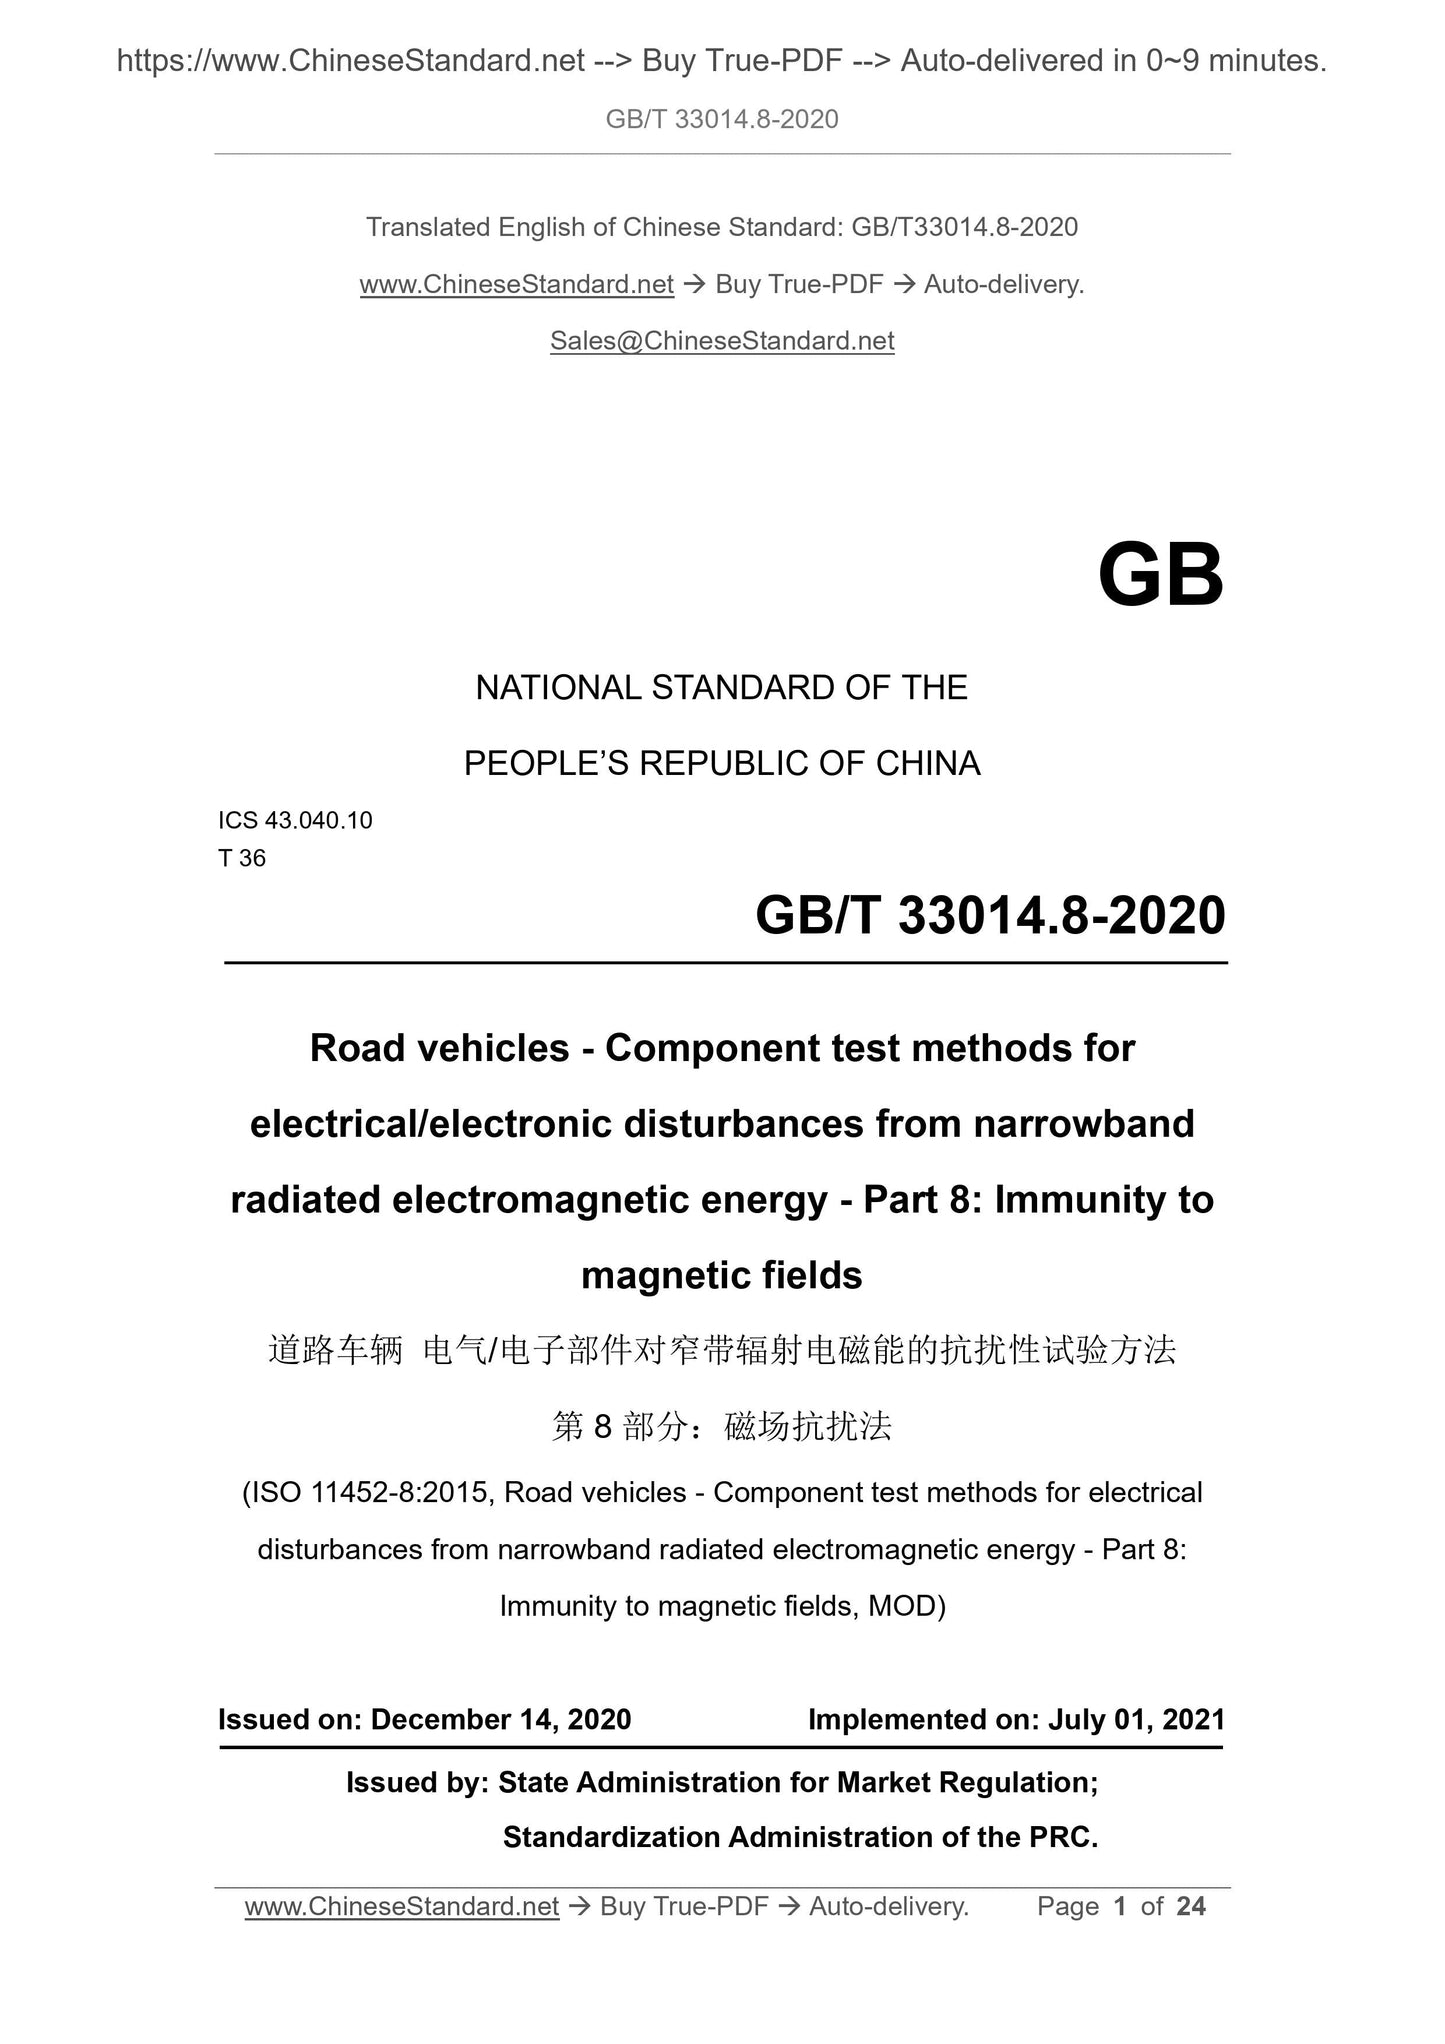 GB/T 33014.8-2020 Page 1